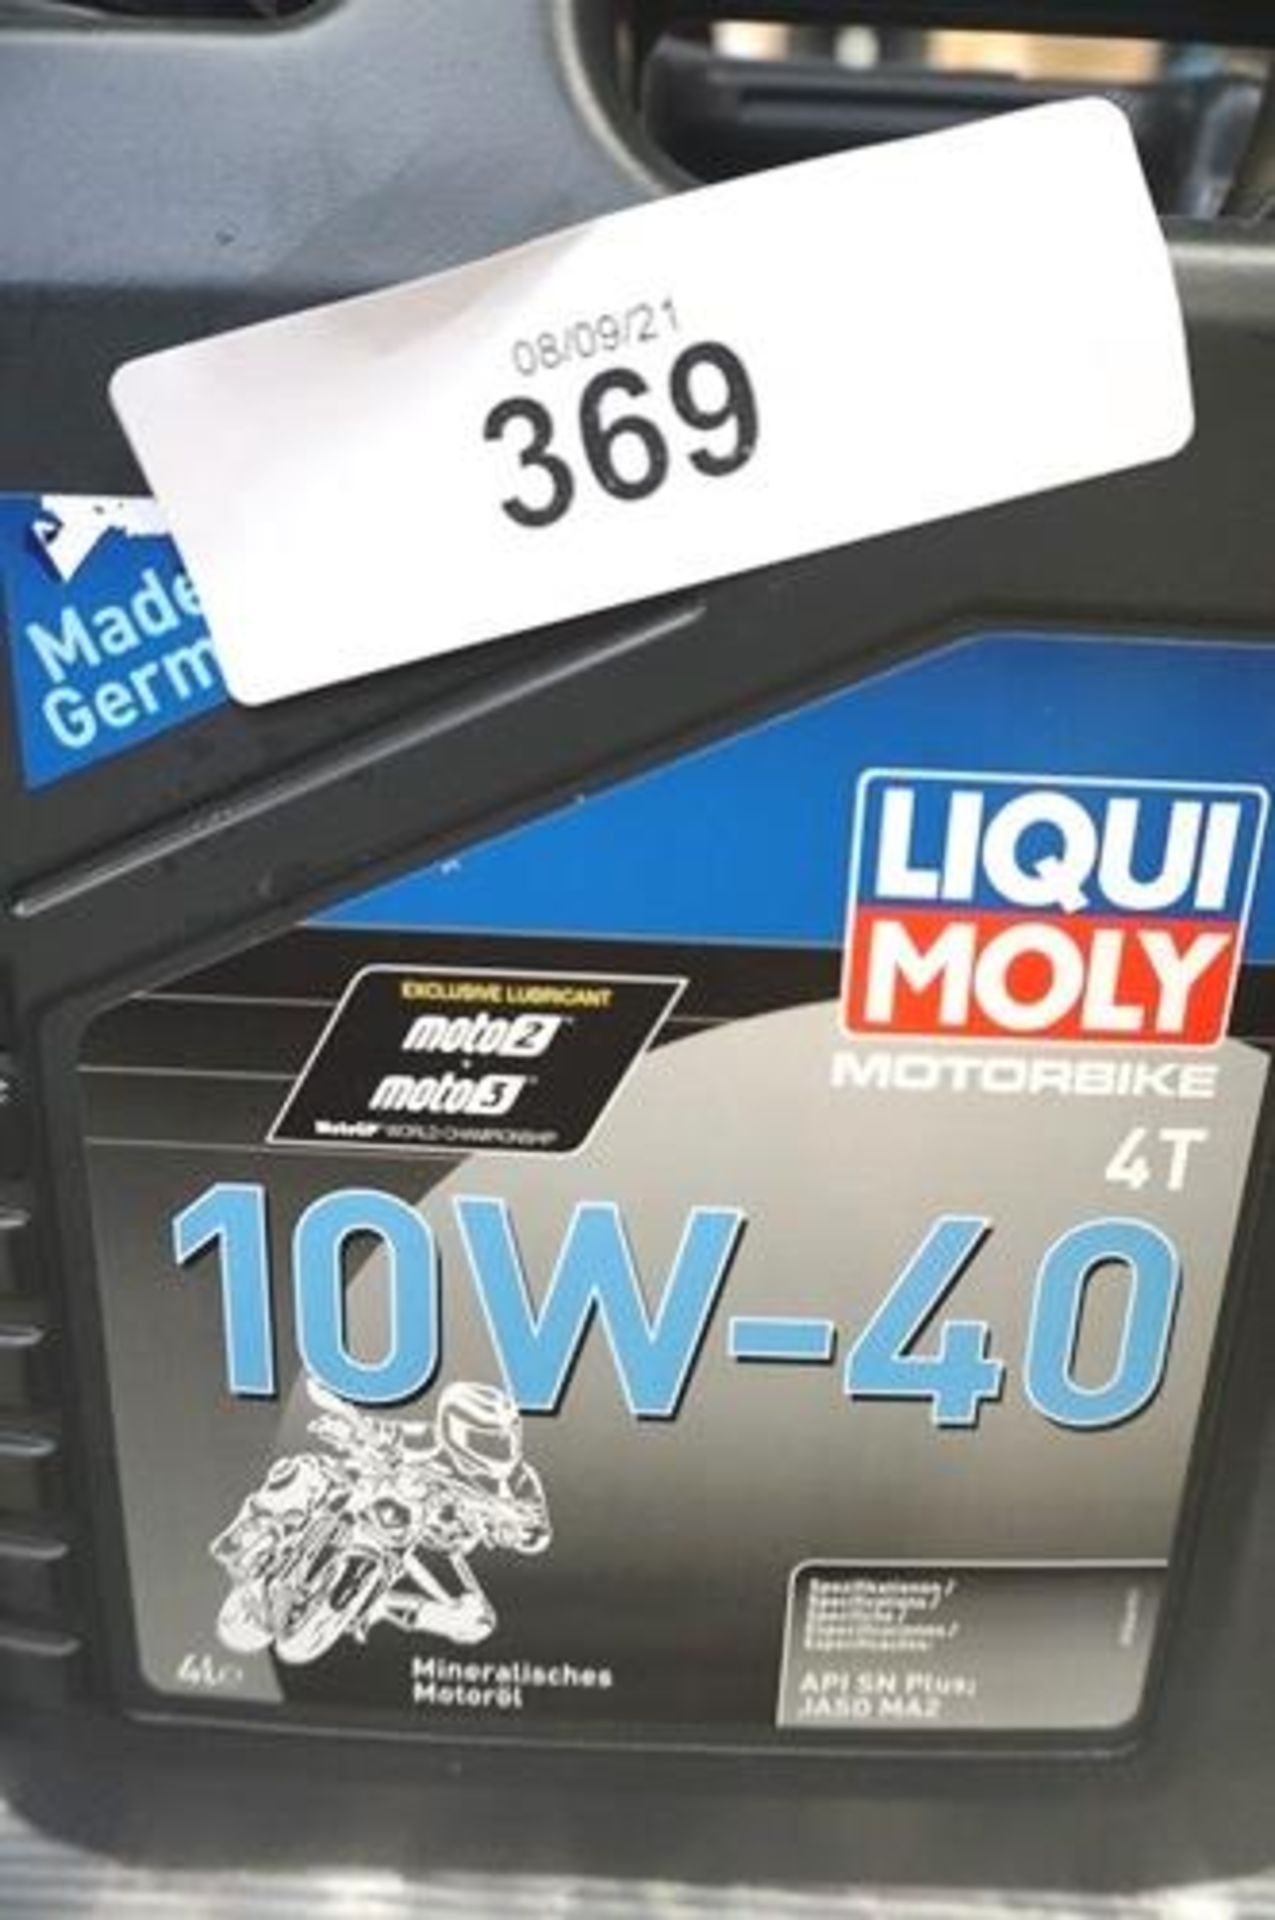 2 x 4ltr bottles of Liqui Moly motorbike 4T 10W-40 engine oil - New (GS9) - Image 2 of 2